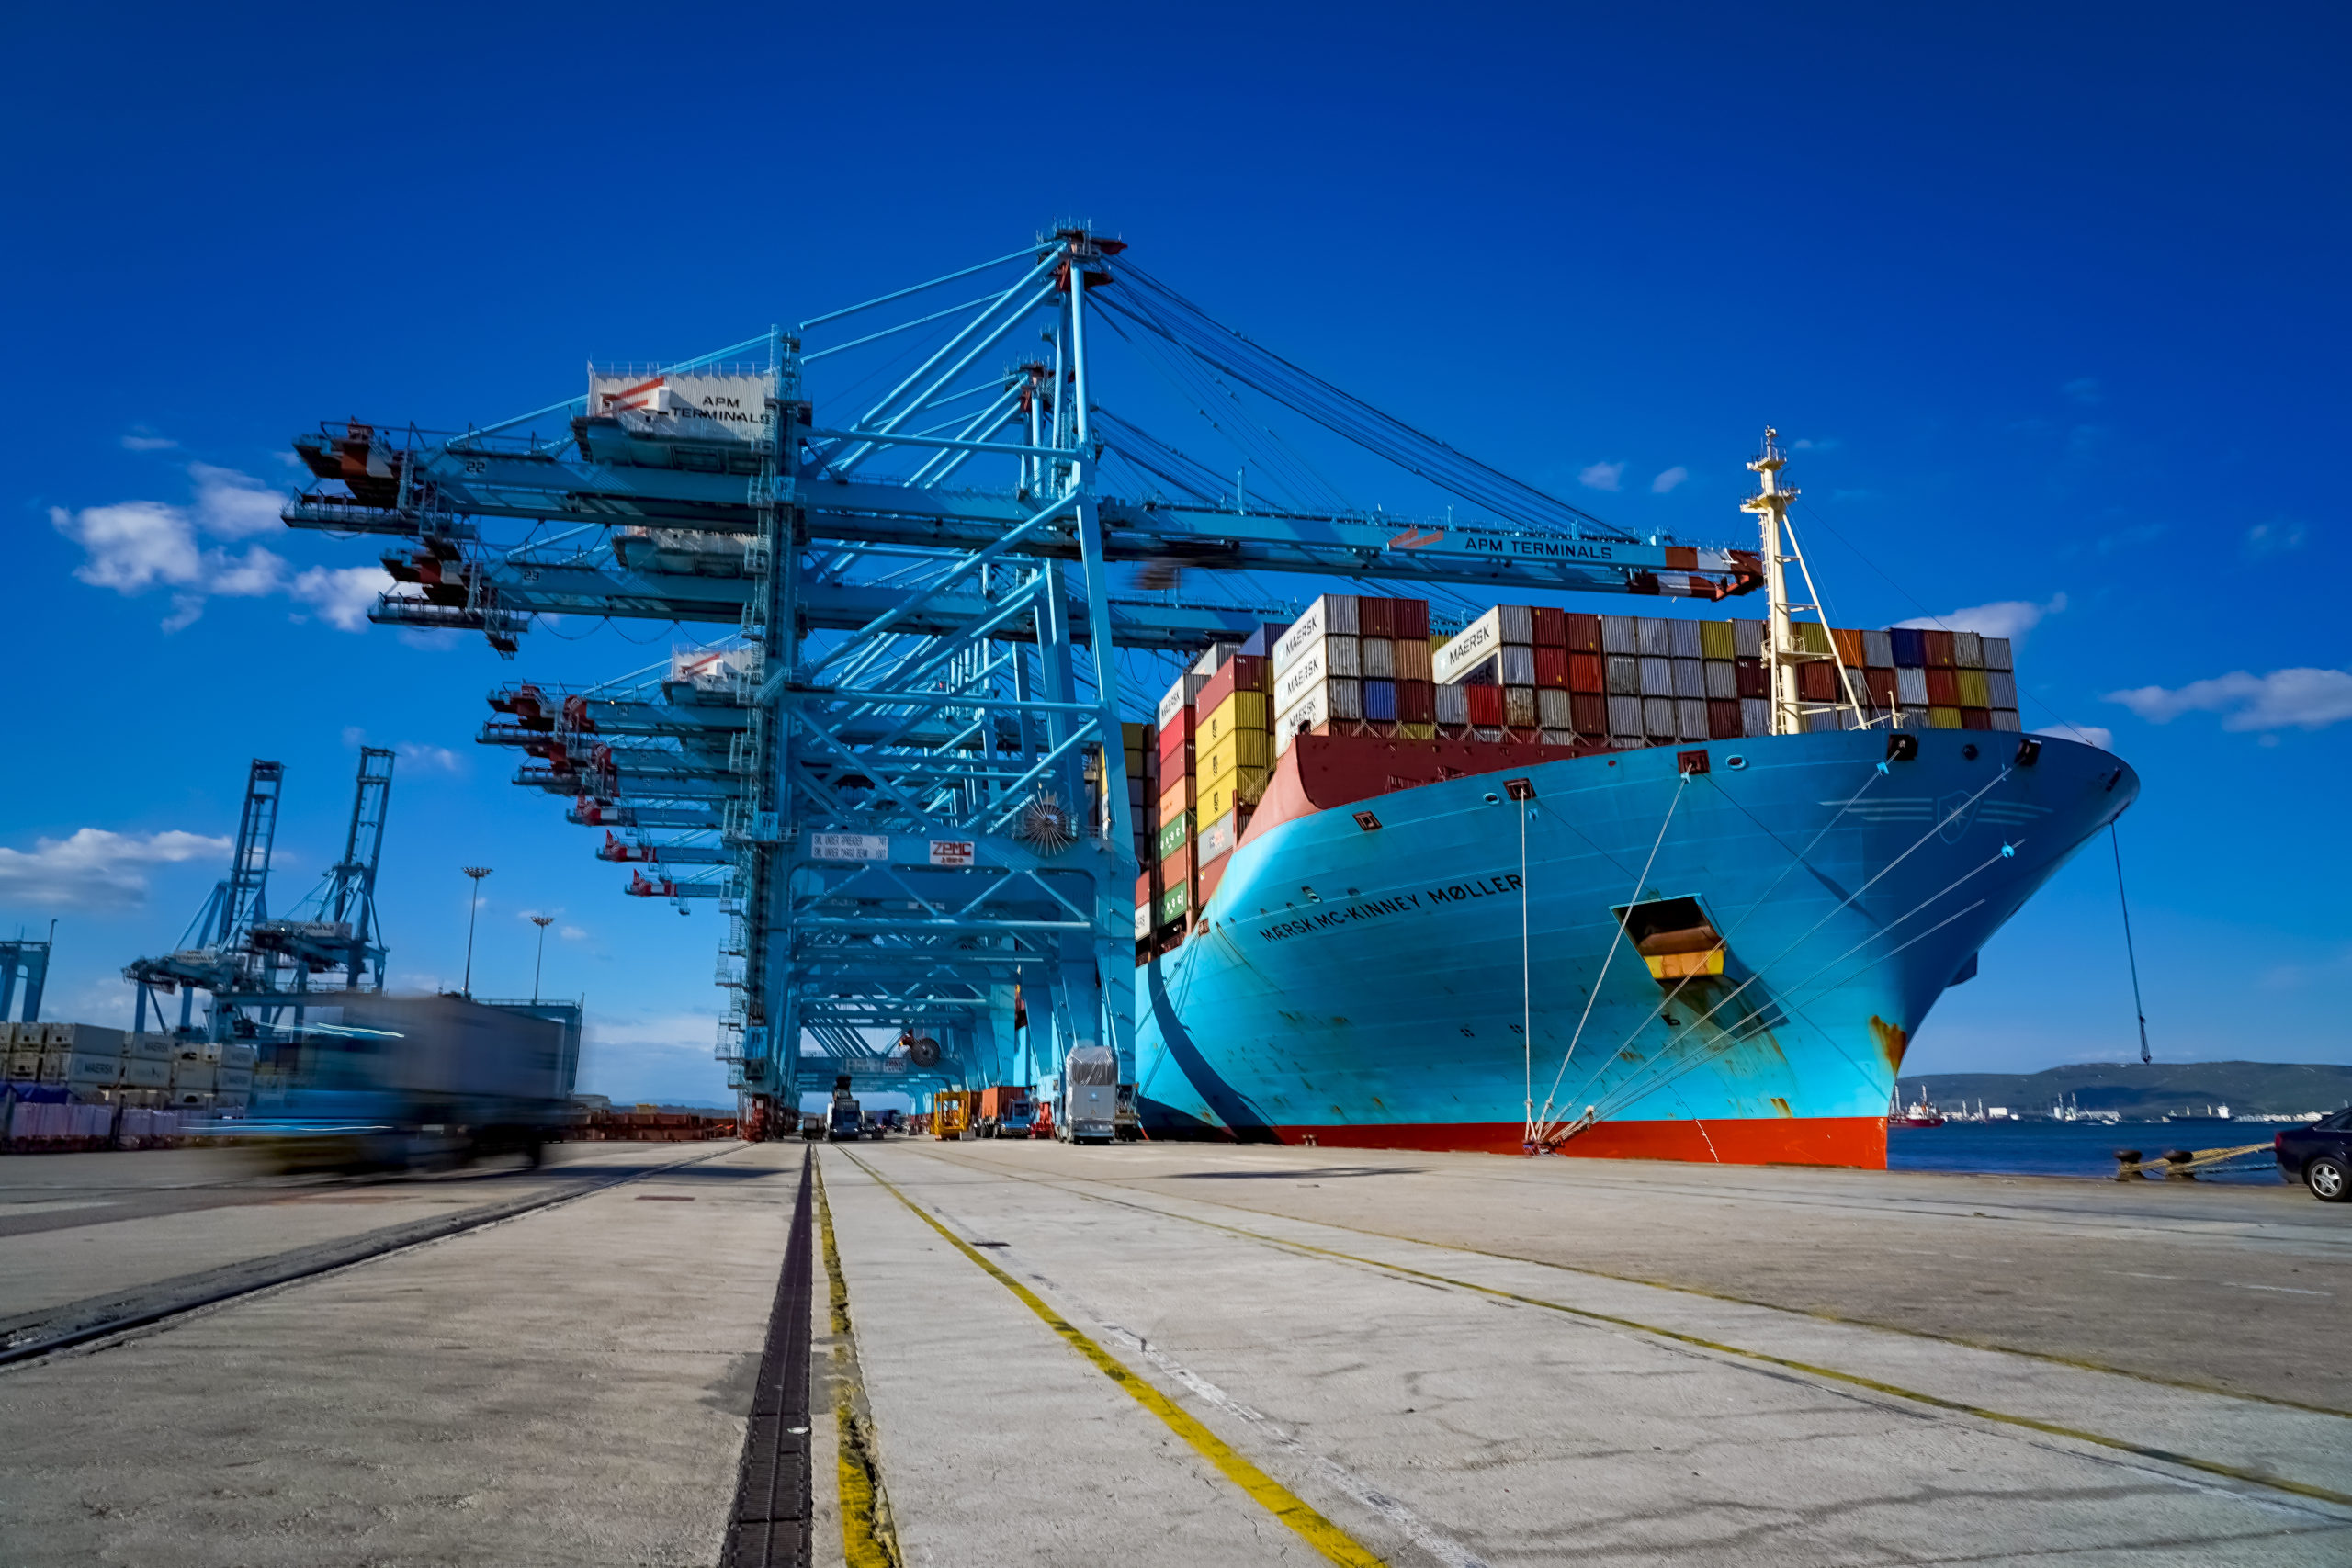 How can data sharing solutions help Port authorities in reducing idle time?